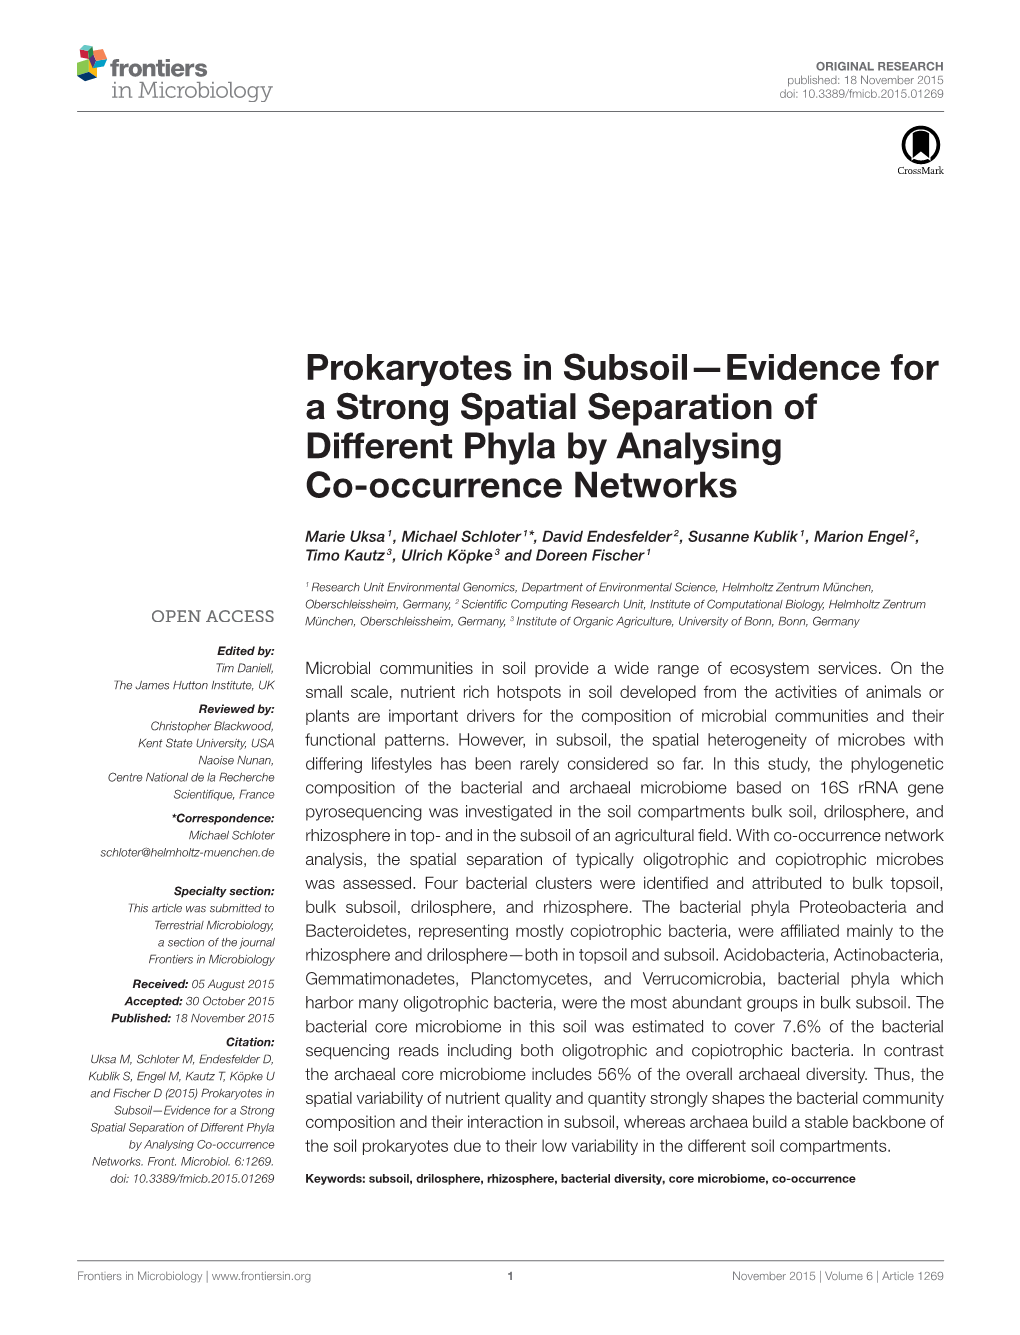 Prokaryotes in Subsoil—Evidence for a Strong Spatial Separation of Different Phyla by Analysing Co-Occurrence Networks